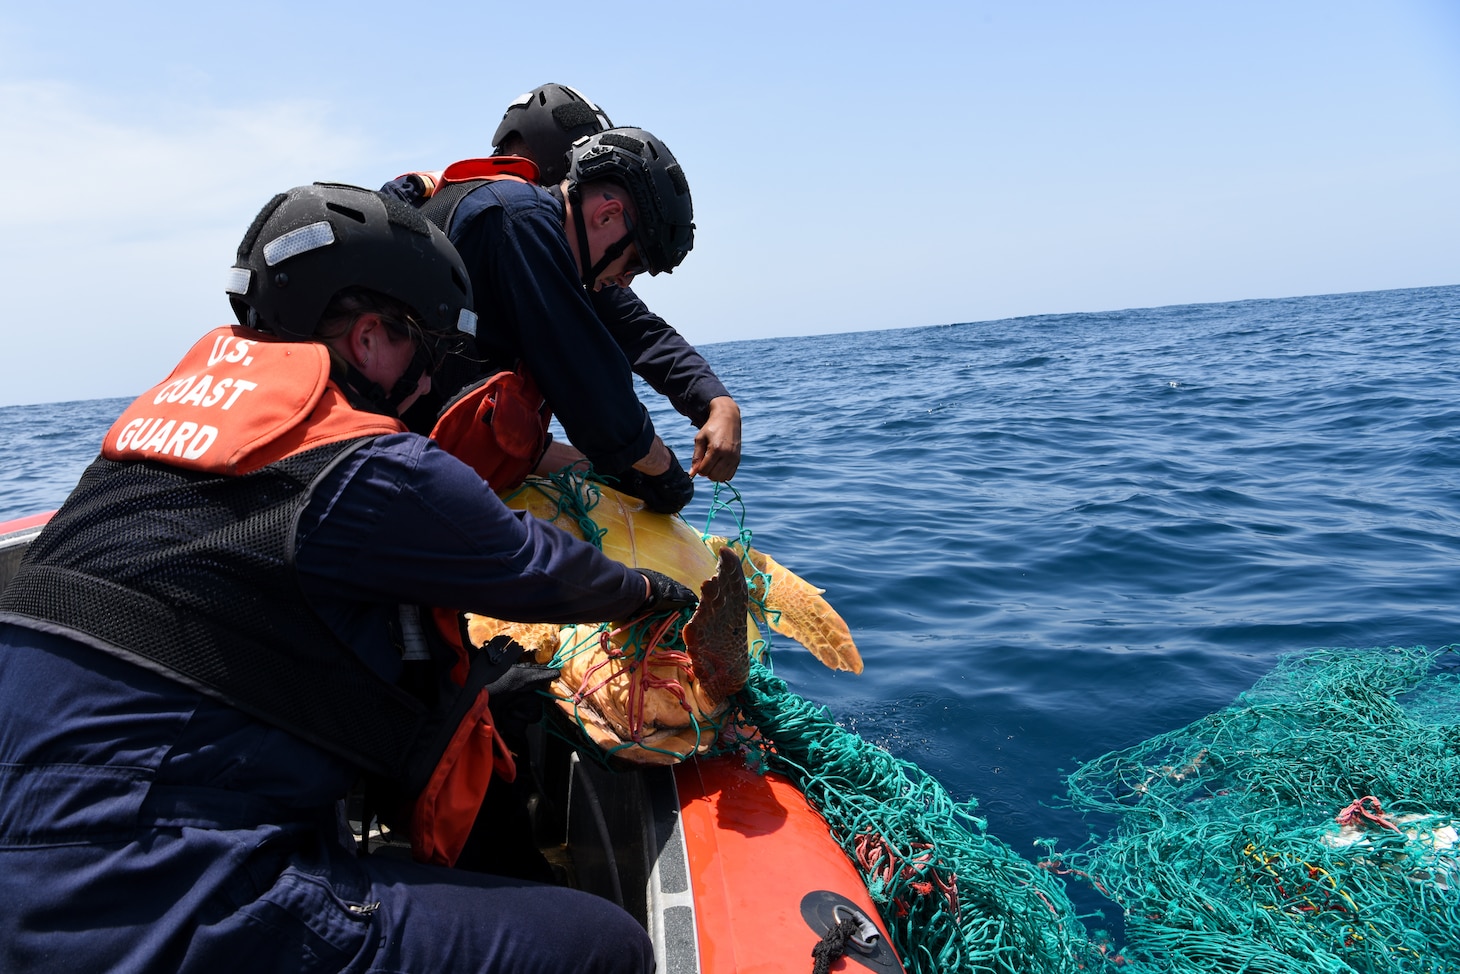 (Left to right) U.S. Coast Guard Petty Officer 2nd Class Caitlyn Mason and Petty Officer 3rd Class Dylan Neathery, assigned to the Famous-class medium endurance cutter USCGC Mohawk (WMEC 913), rescue a sea turtle caught in a fishing net in the Atlantic Ocean, July 14, 2022. USCGC Mohawk is on a scheduled deployment in the U.S. Naval Forces Africa area of operations, employed by U.S. Sixth Fleet to defend U.S., allied, and partner interests.